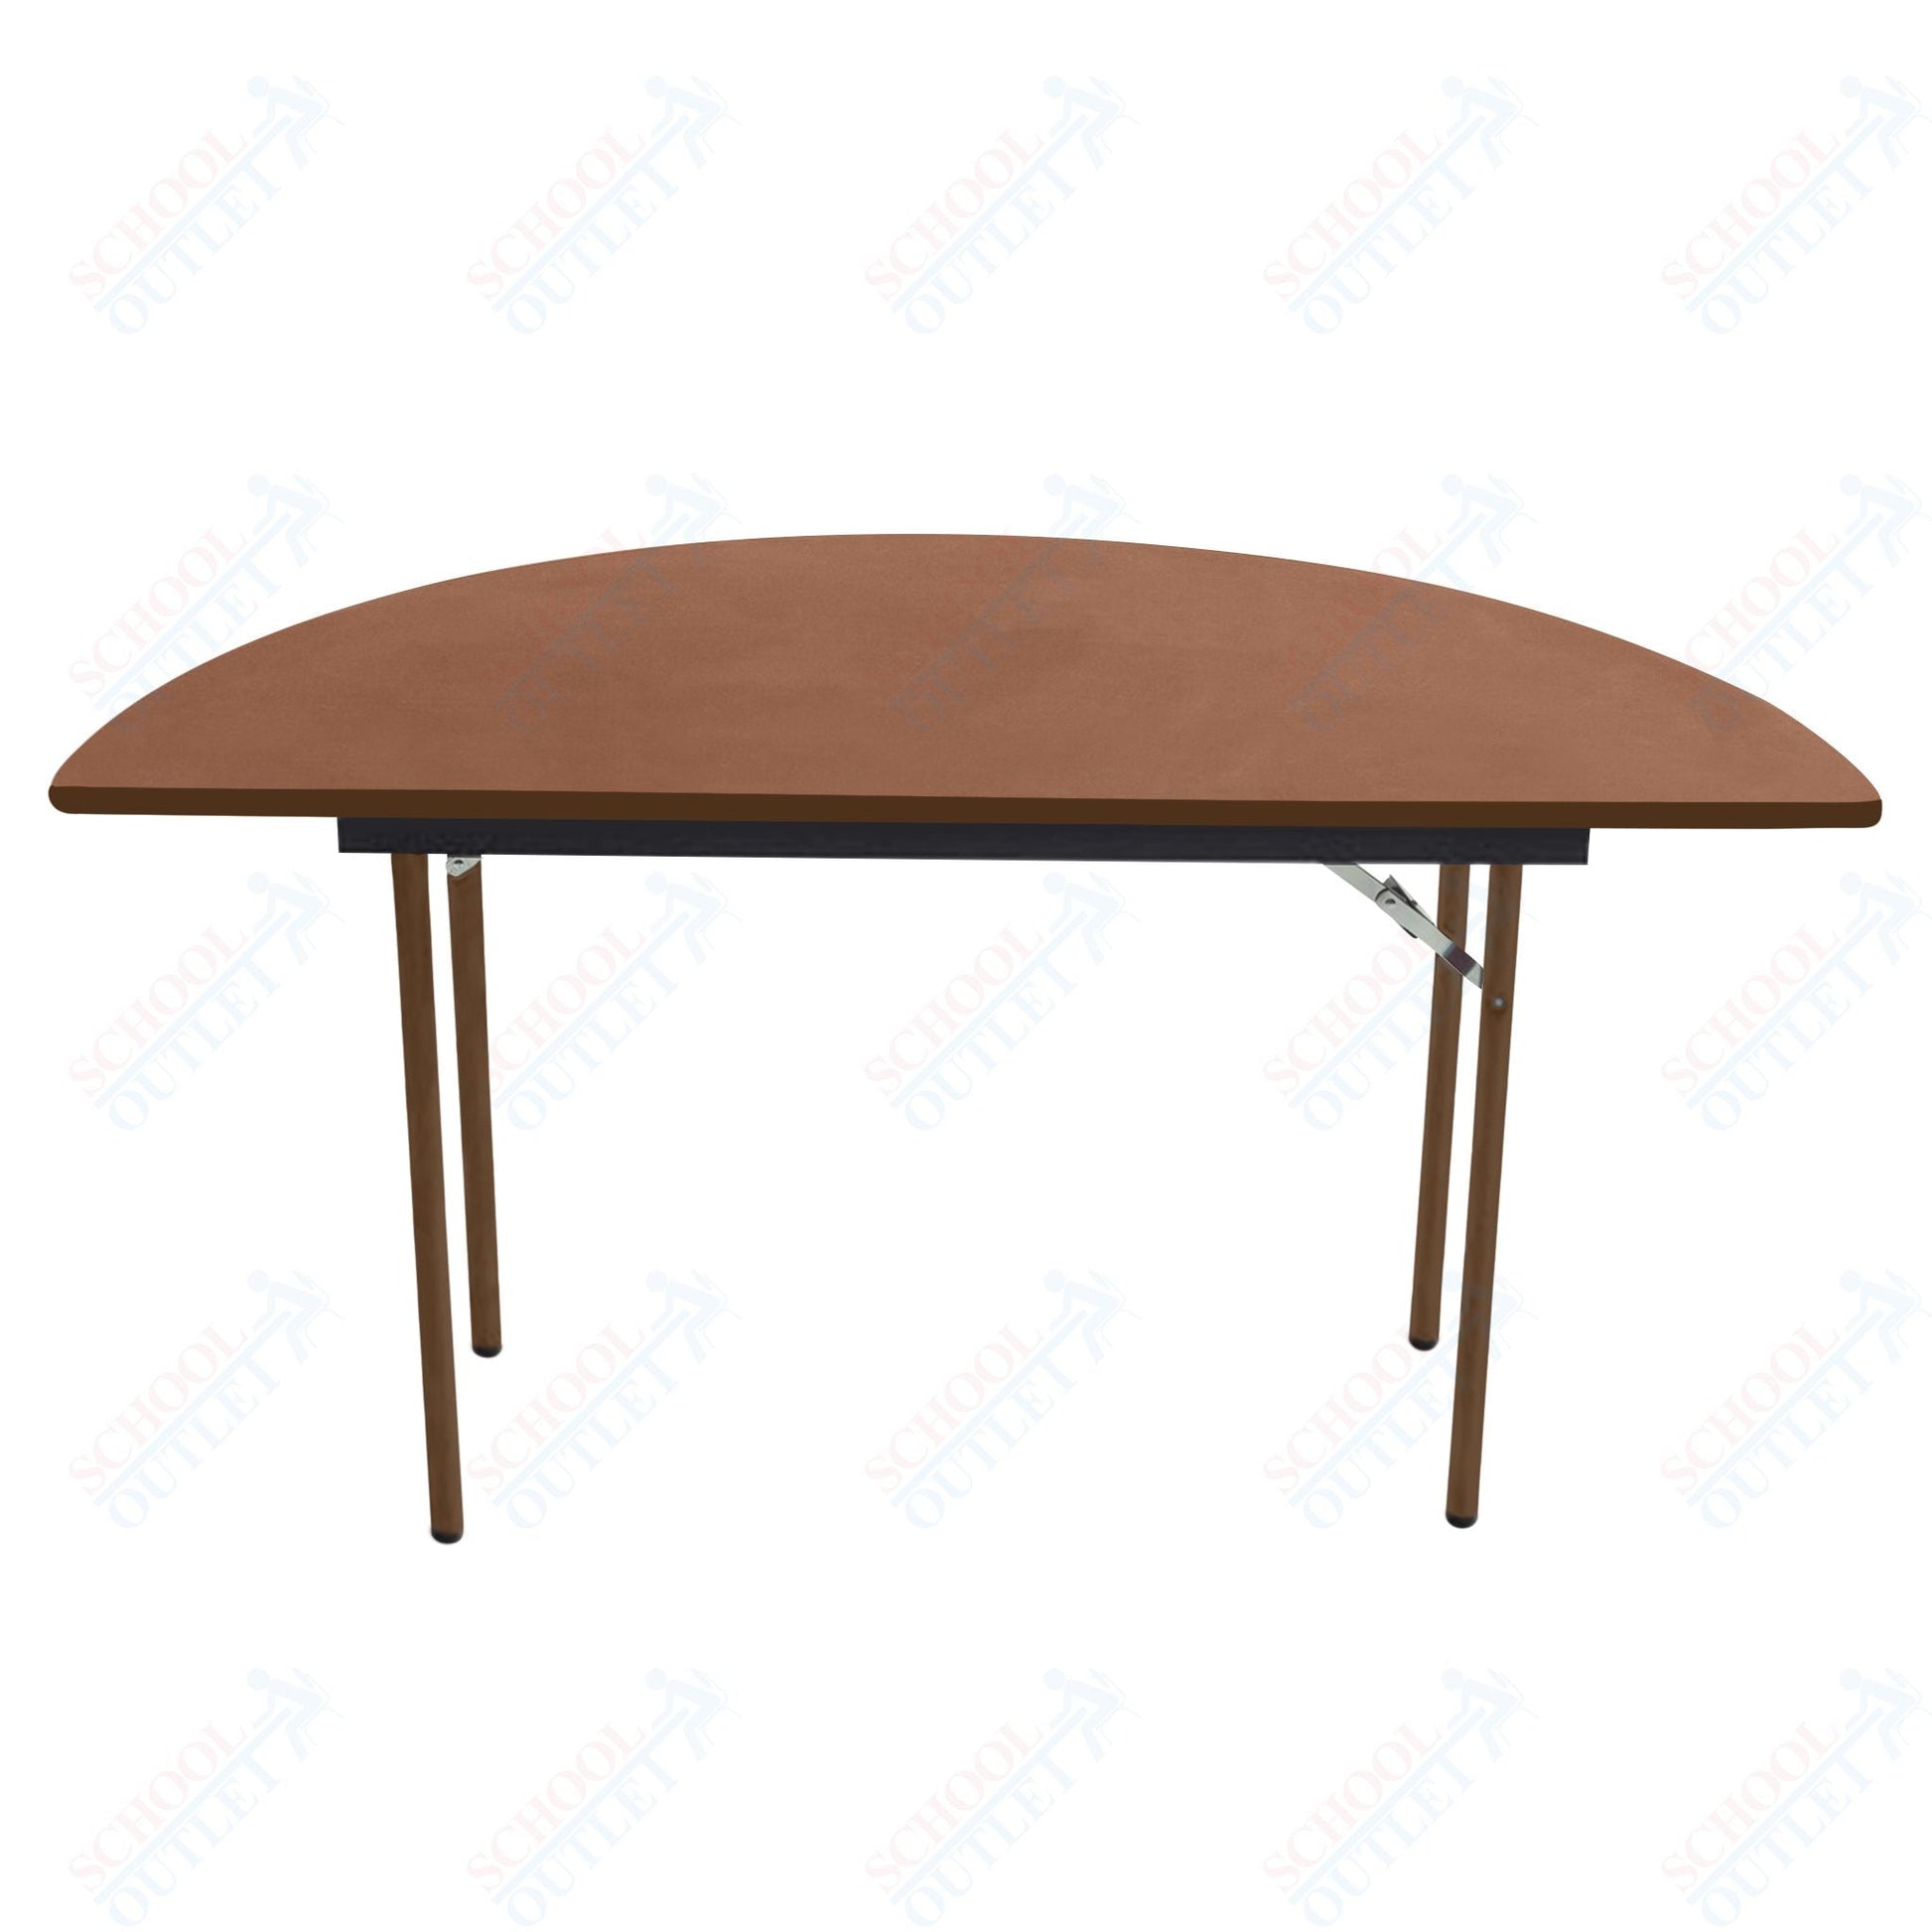 AmTab Folding Table - Plywood Stained and Sealed - Vinyl T - Molding Edge - Half Round - Half 72" Diameter x 29"H (AmTab AMT - HR72PM) - SchoolOutlet